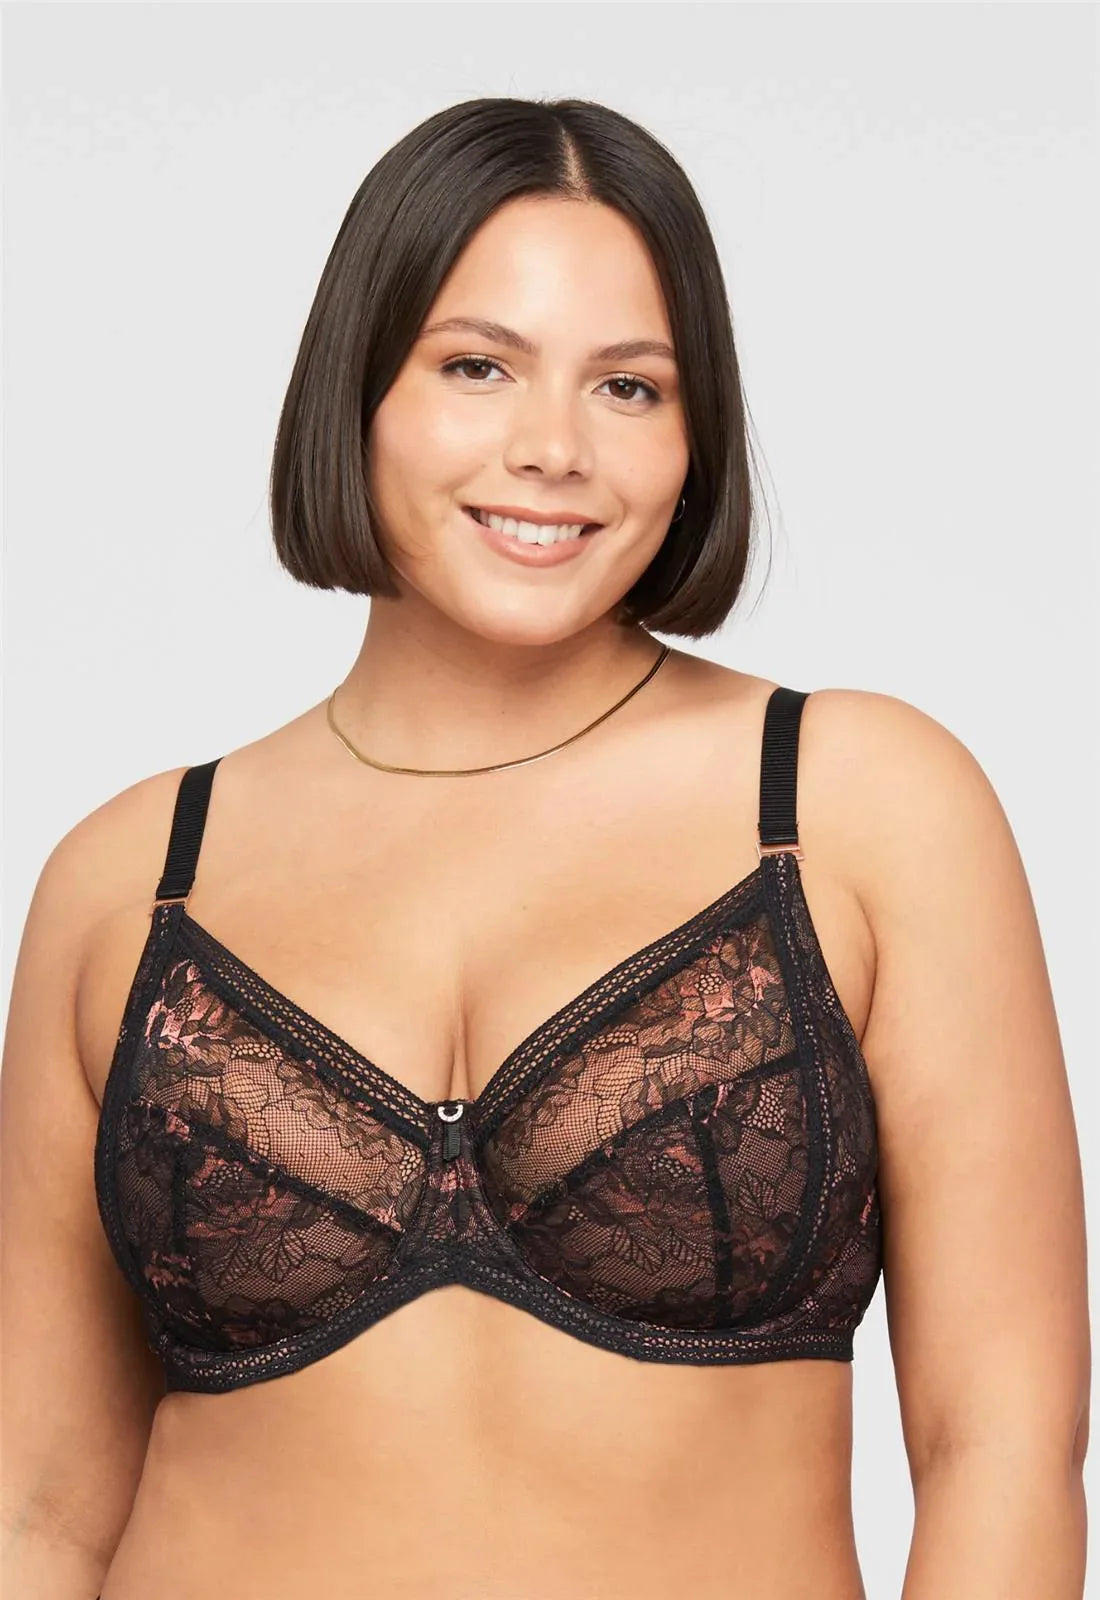 Lace Bras 34G, Bras for Large Breasts